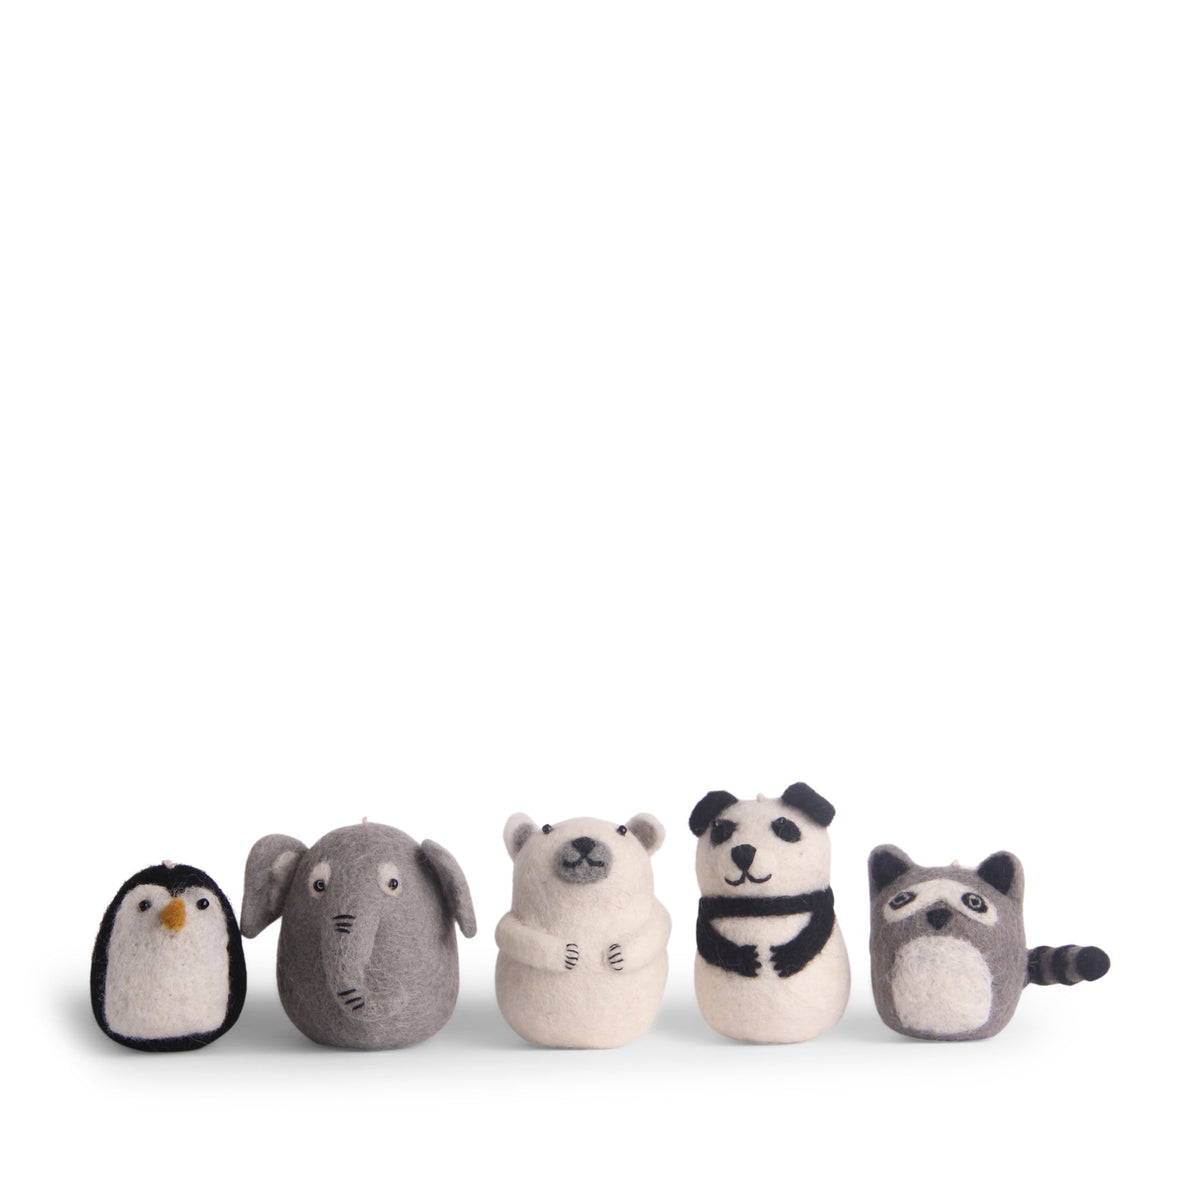 Felted Zoo Animals (Set of 5) by Én Gry & Sif - Maude Kids Decor